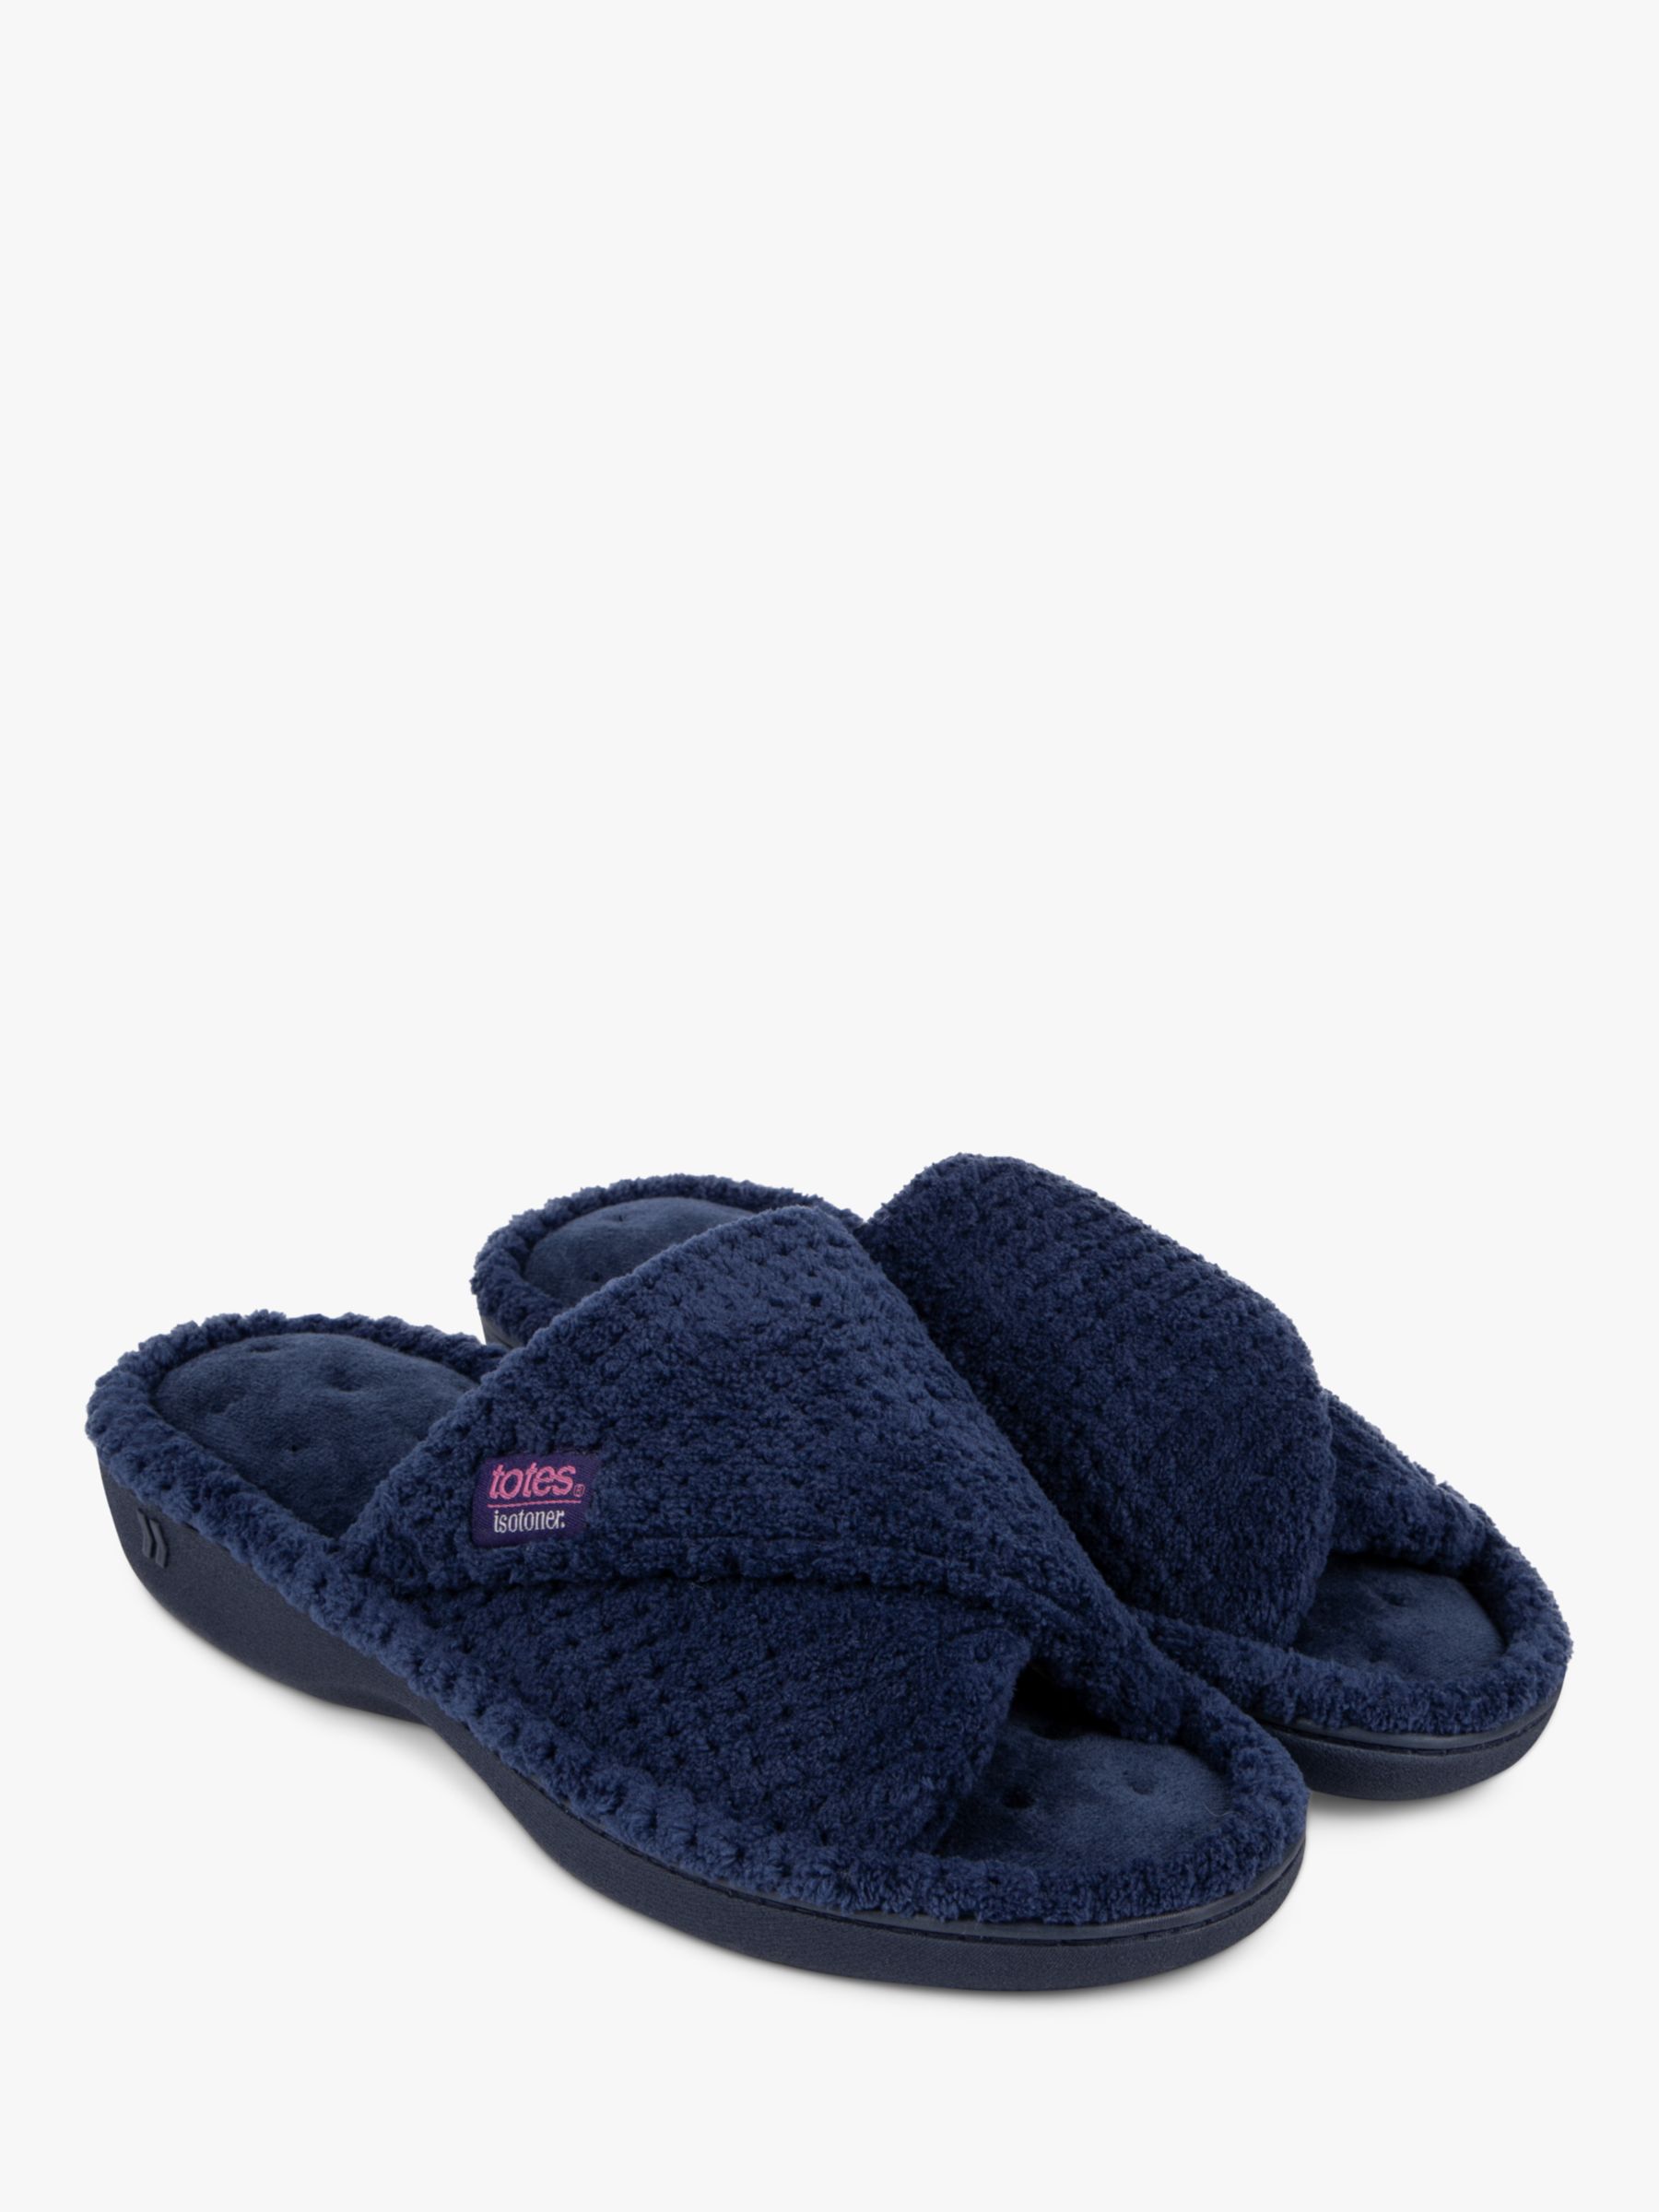 totes Textured Popcorn Turnover Mule Slippers, Navy, 4